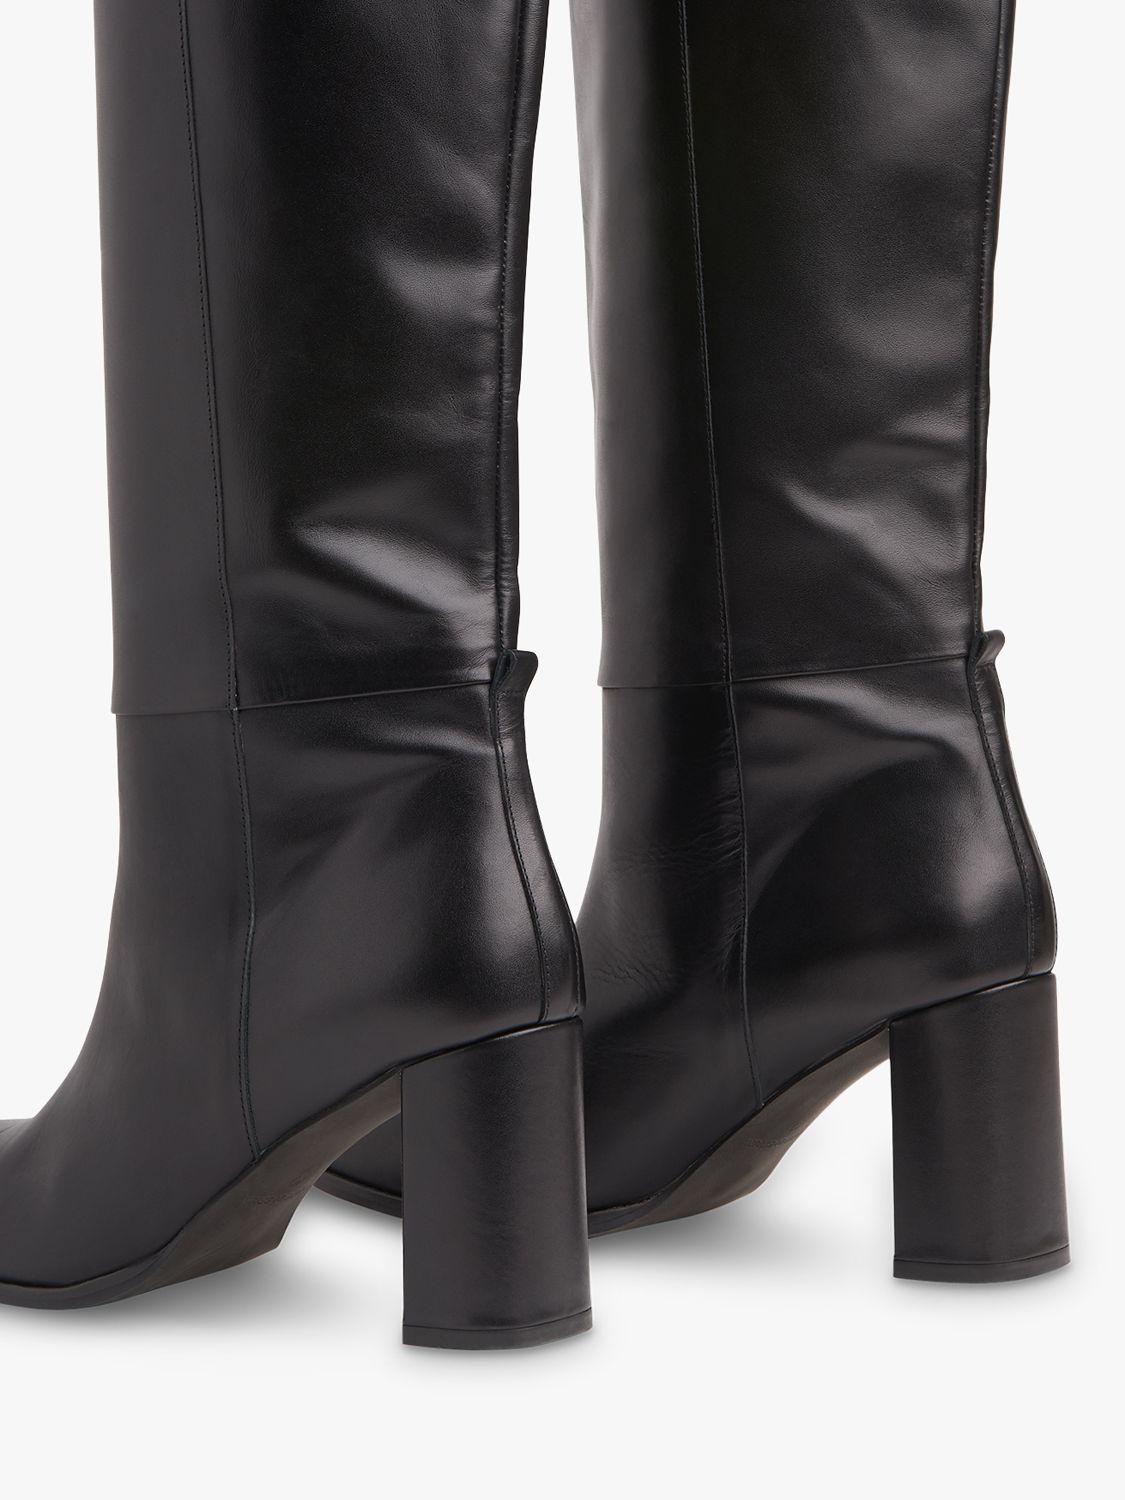 Whistles Gibson Leather Knee High Boots, Black at John Lewis & Partners